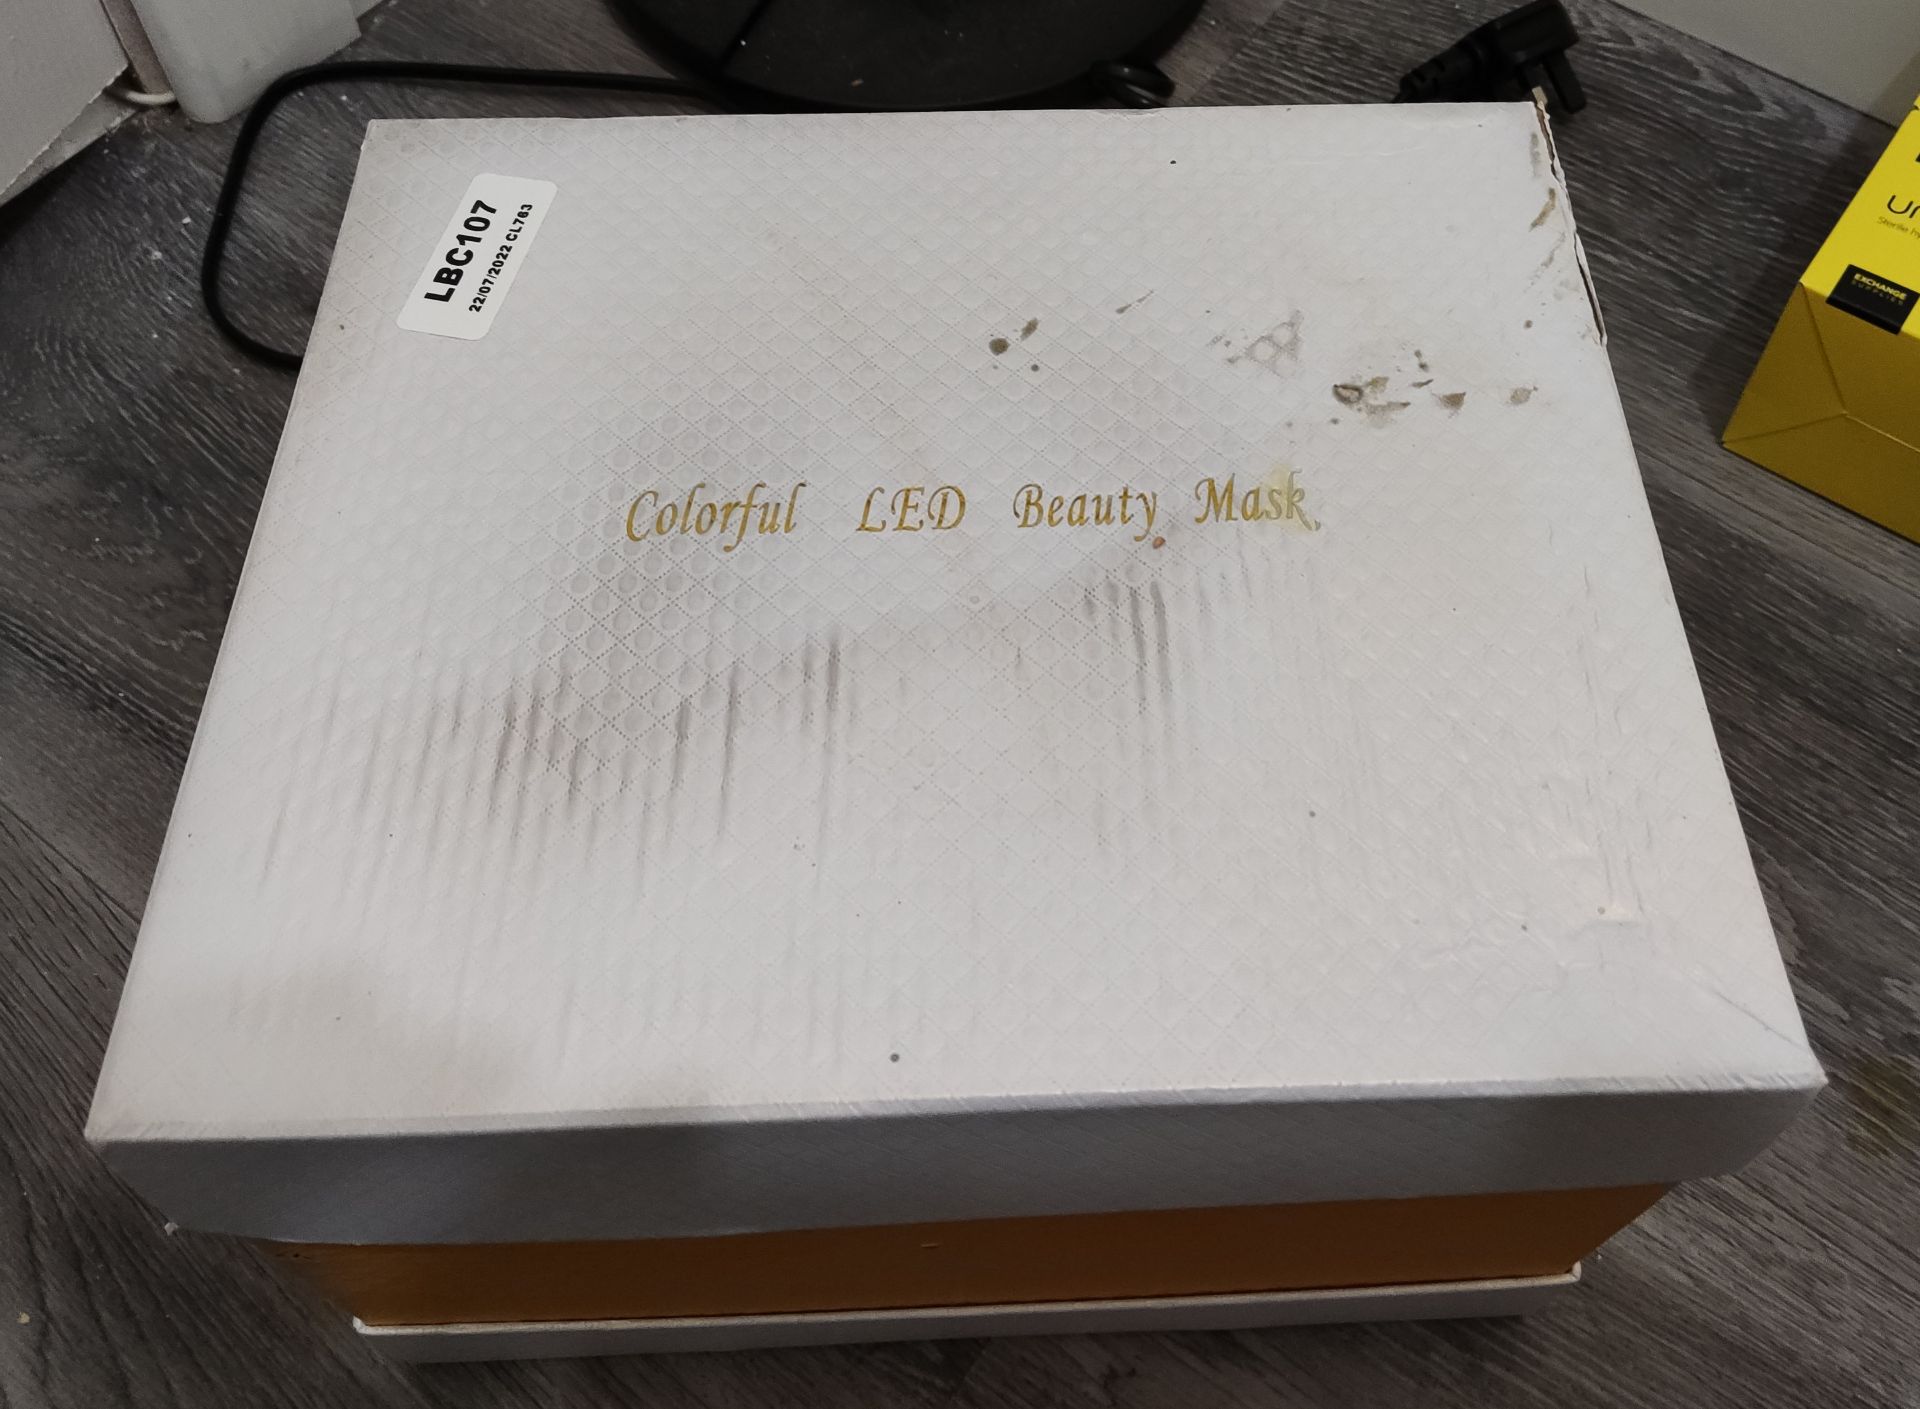 1 x LED Light Beauty Therapy Mask - Boxed - LBC107 - CL763- Location: Sale M33This item is f - Image 2 of 4